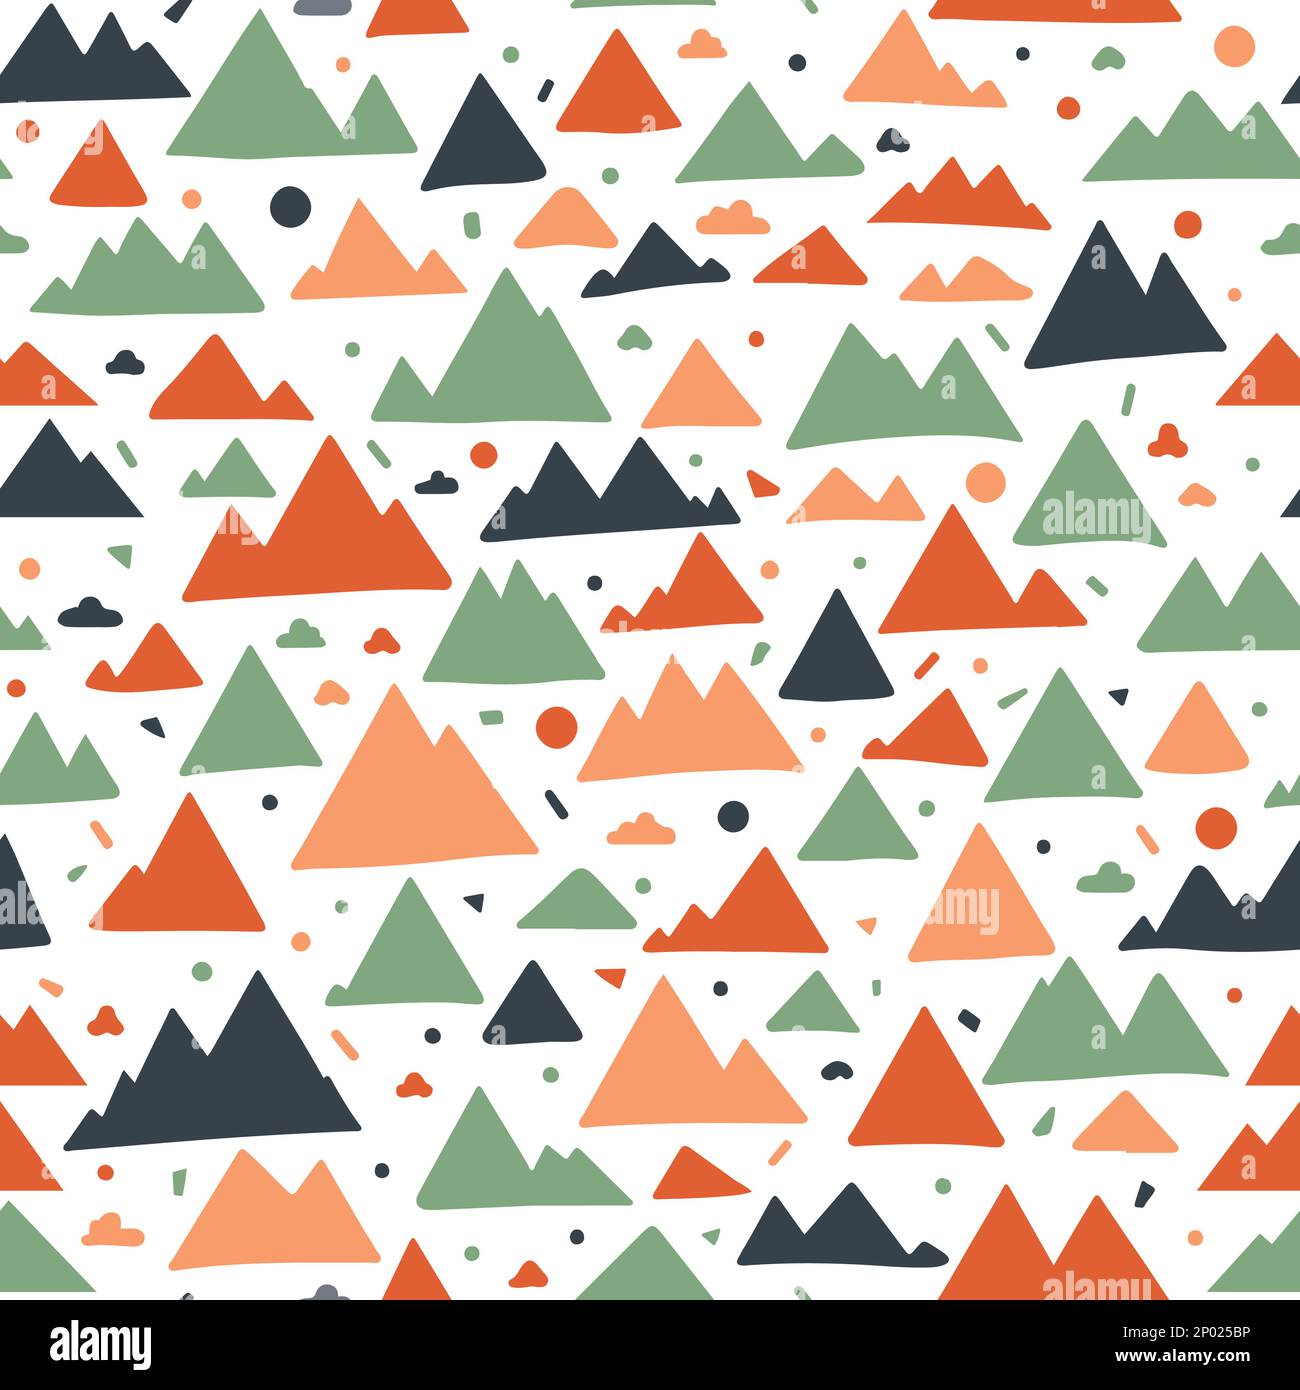 Vector Minimalist Landscape or Mountain Seamless Surface Pattern for Products or Wrapping Paper Prints. Stock Vector